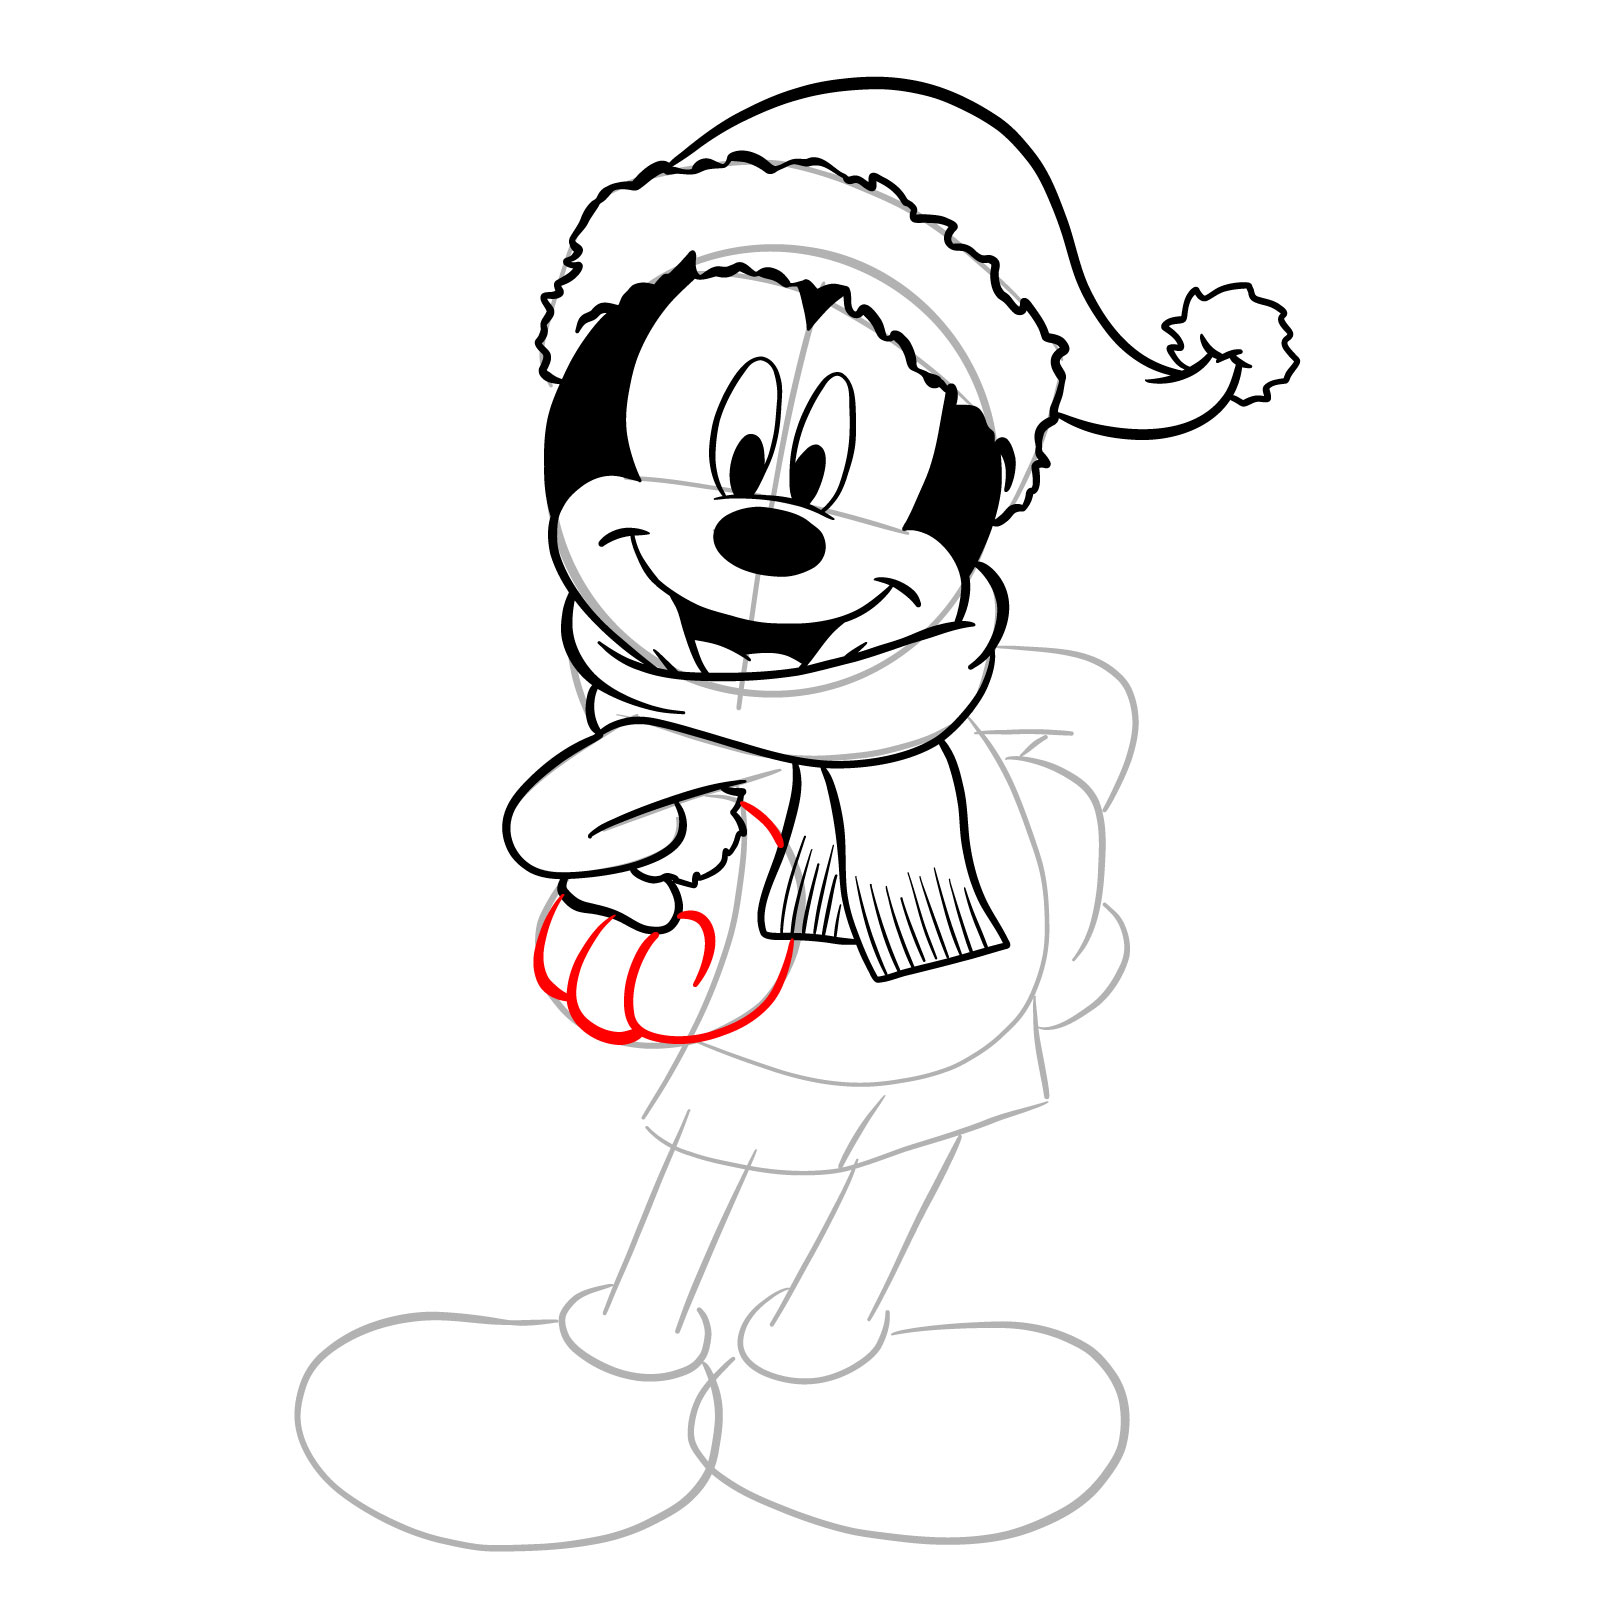 How to draw Santa Mickey Mouse - step 22